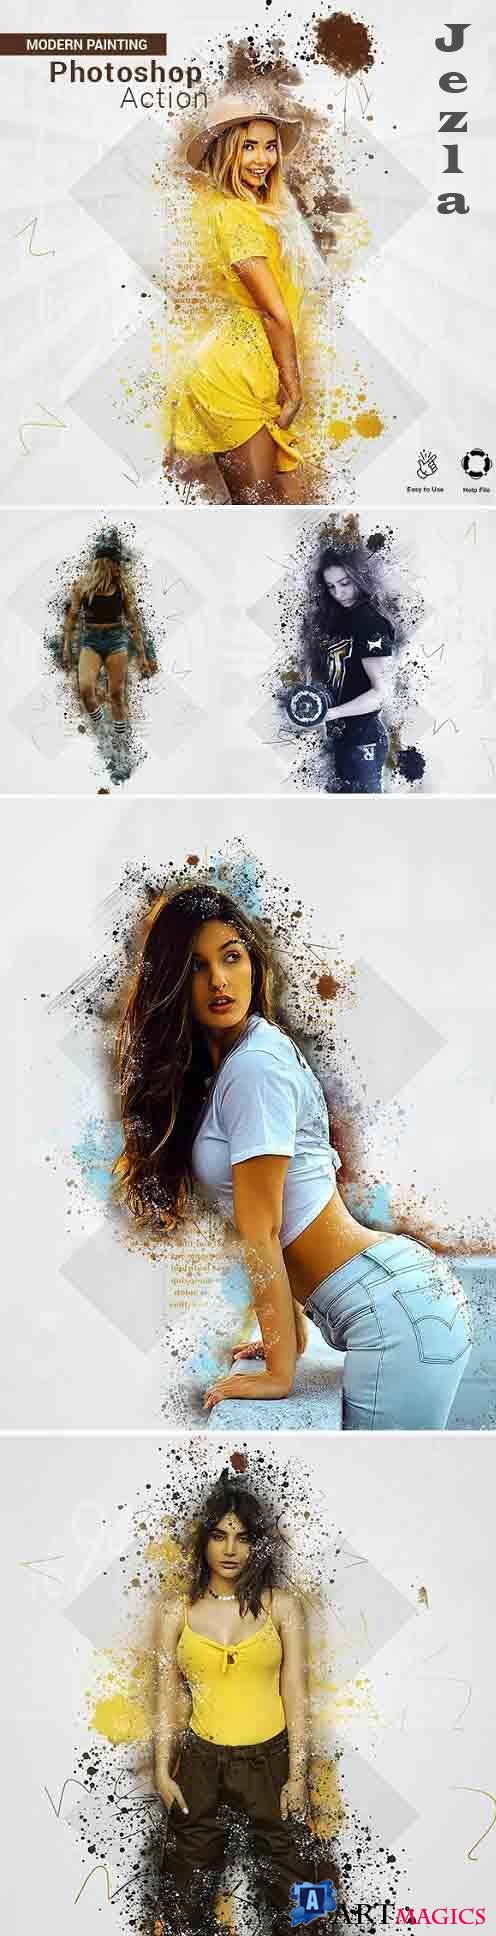 Painting Photoshop Action - 27497079